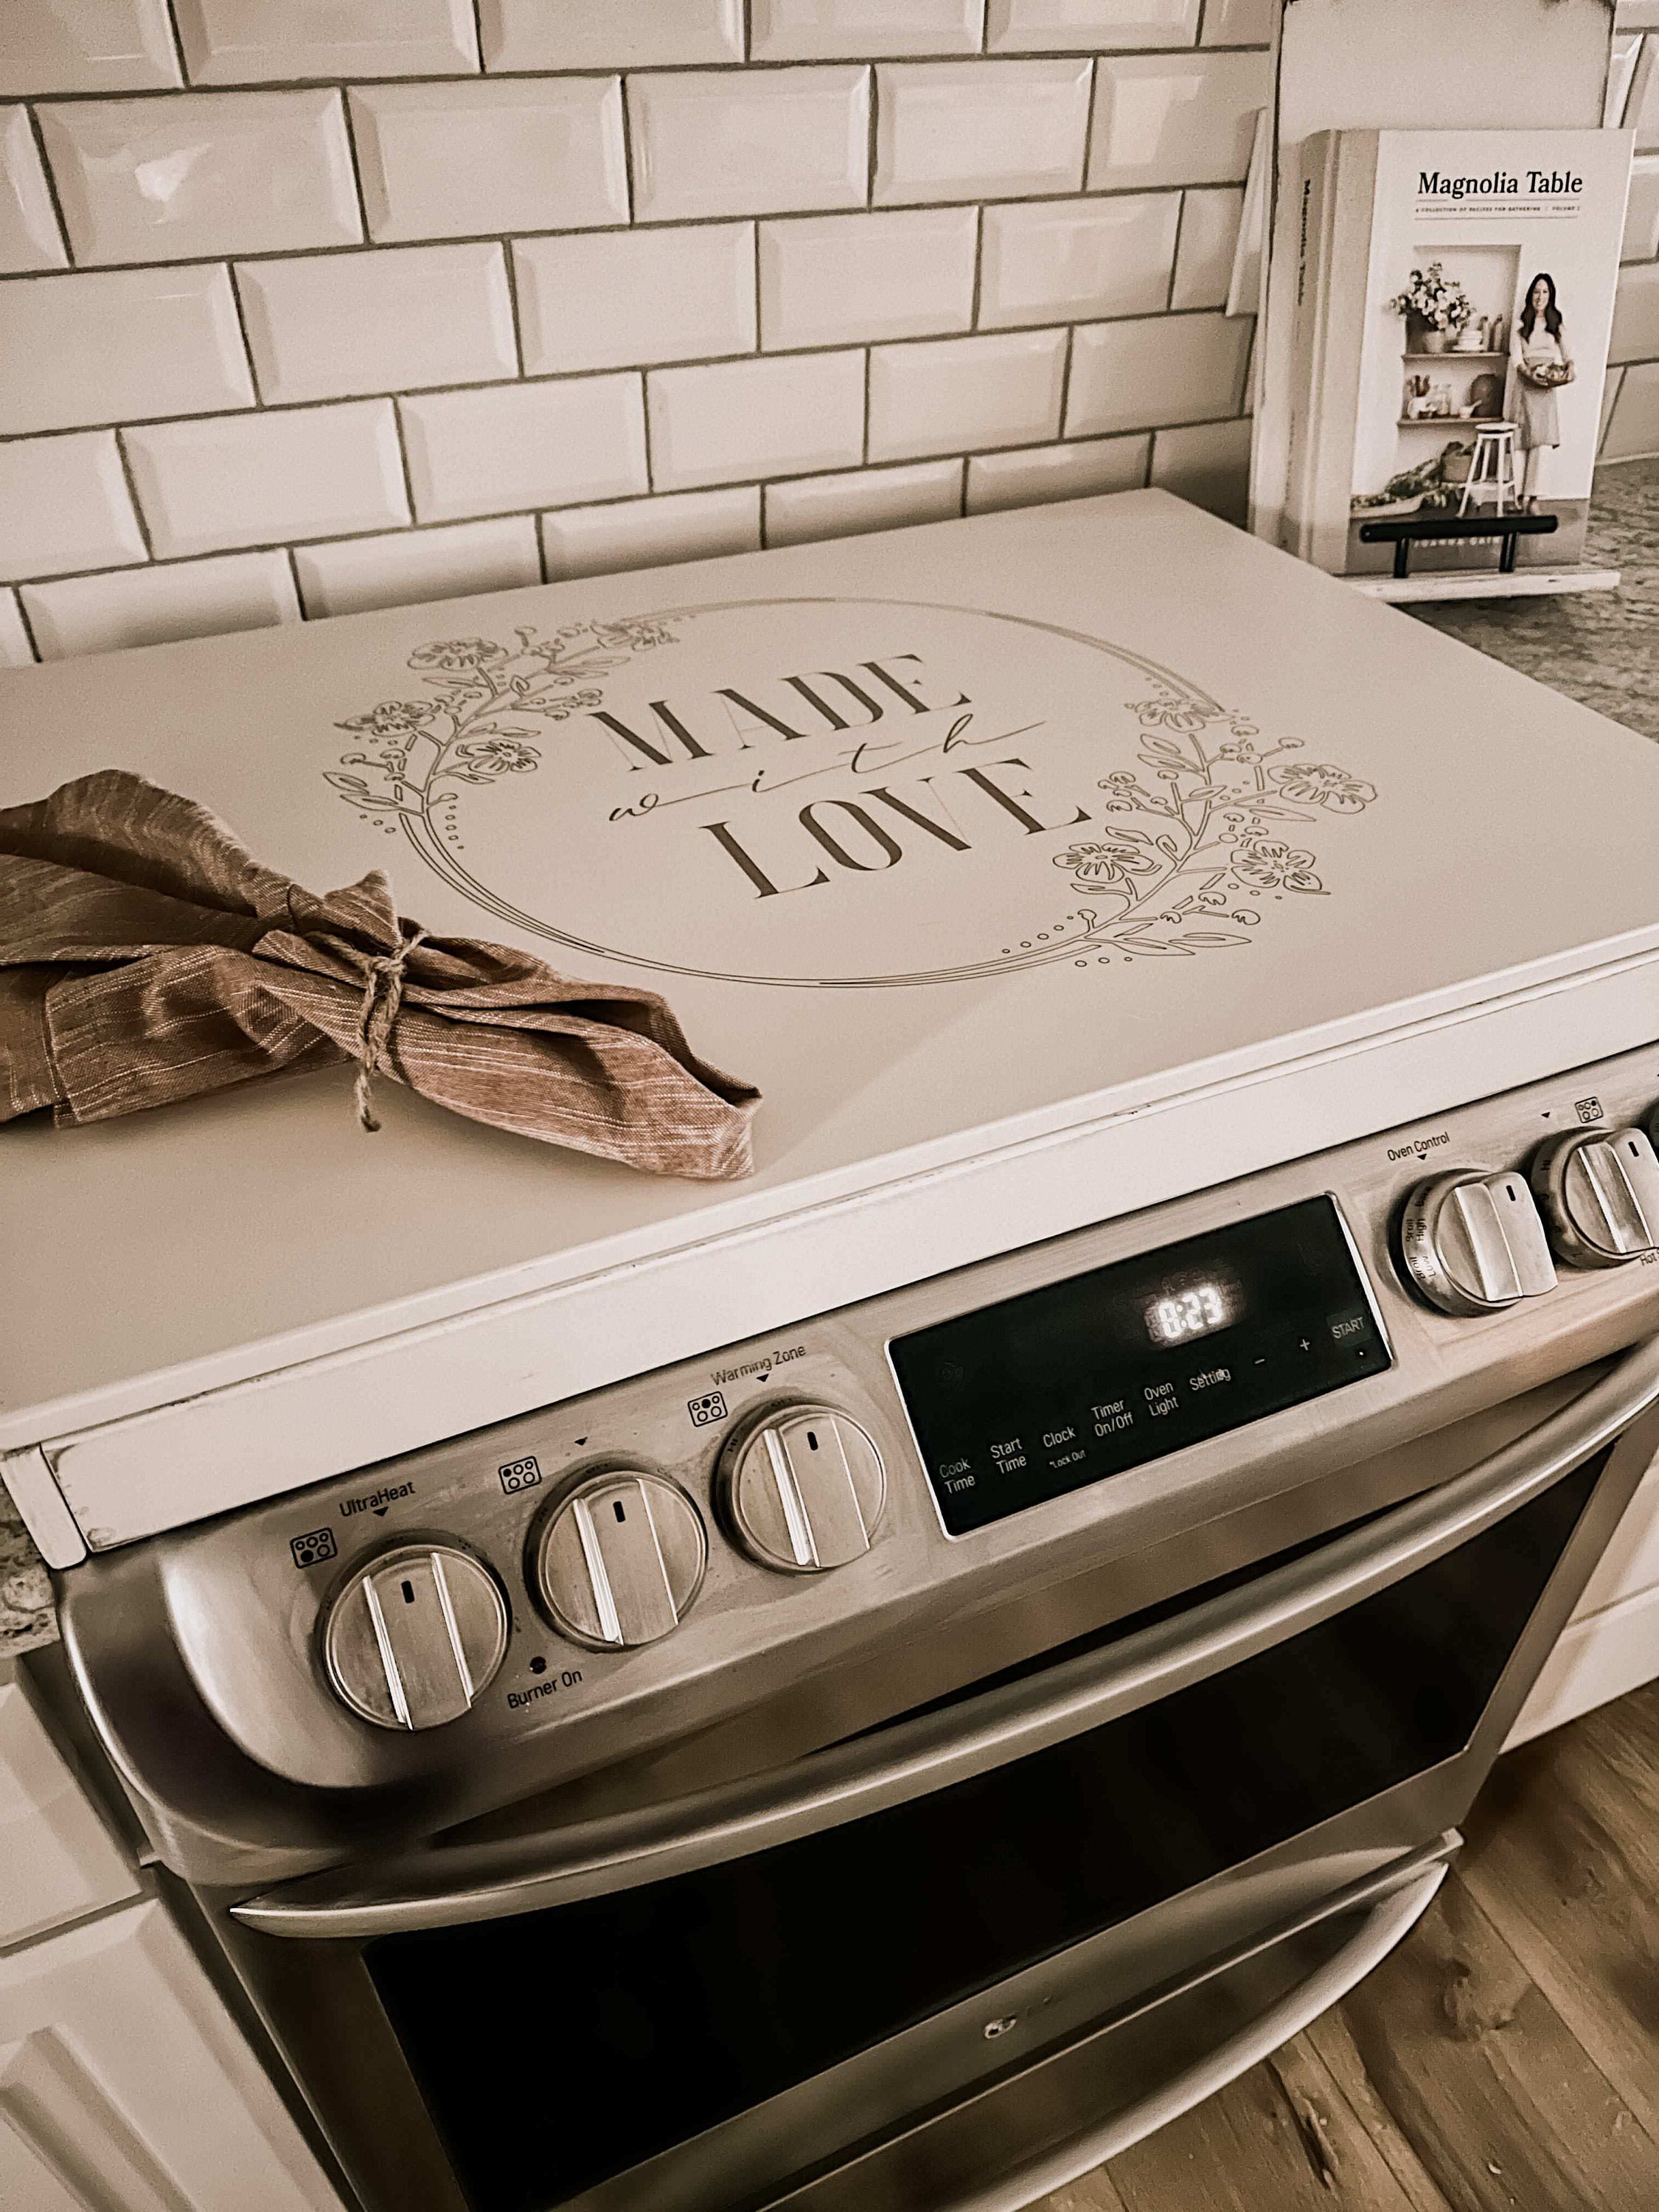 stove covers-noodle boards – The LoveMade Home